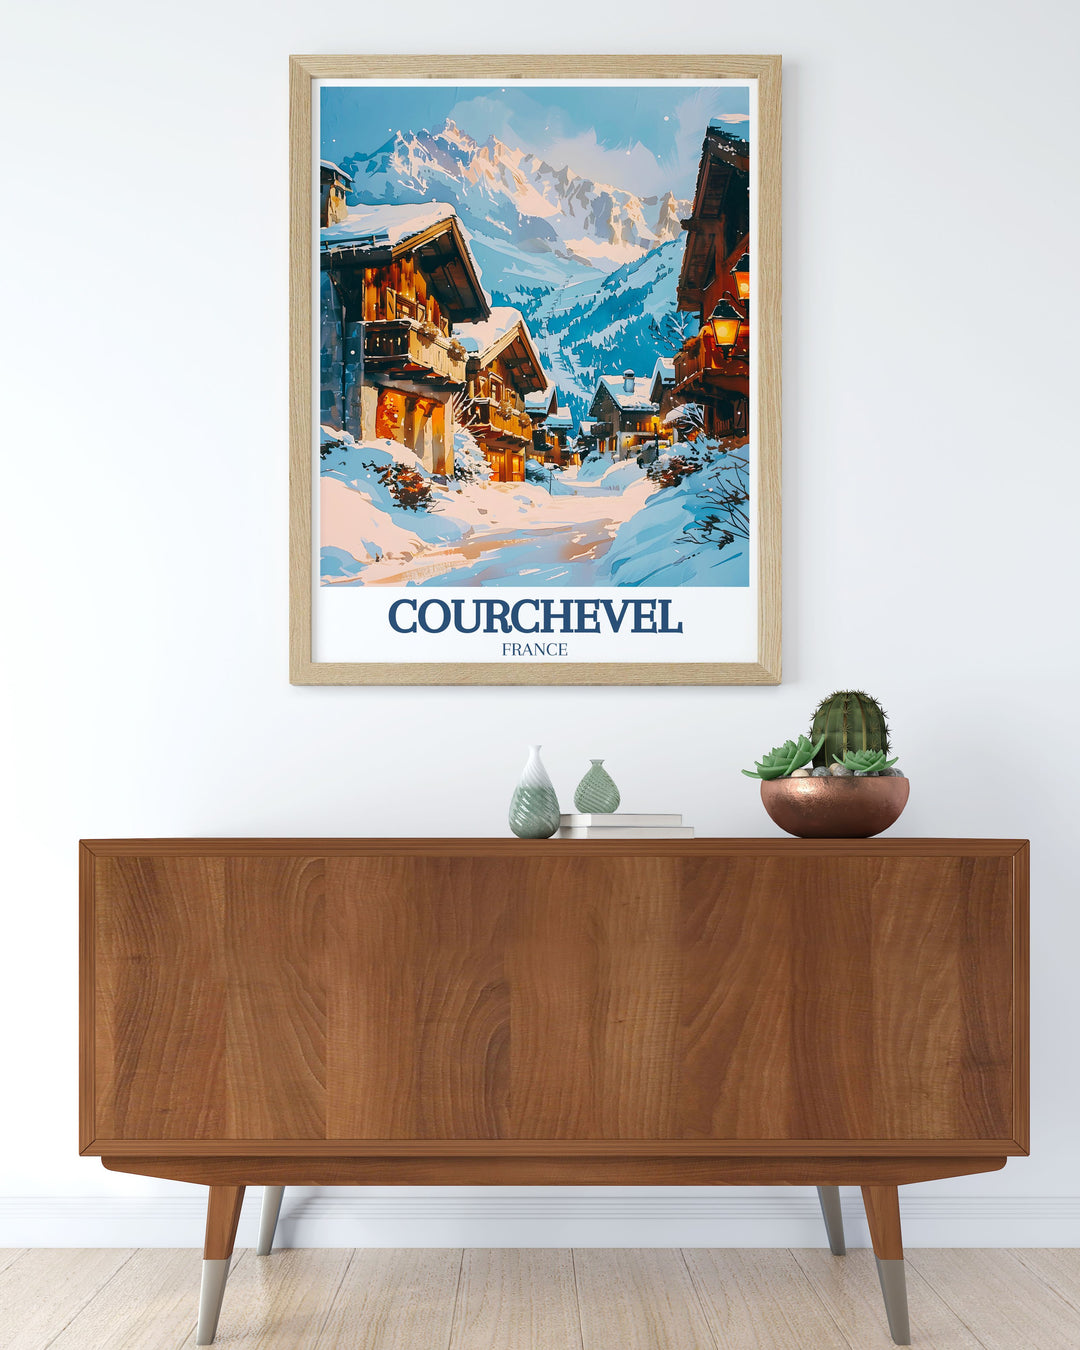 The captivating blend of adventure in Courchevel 1850 and the scenic beauty of the French Alps is beautifully illustrated in this poster, making it a stunning addition to any wall art collection celebrating skiing.